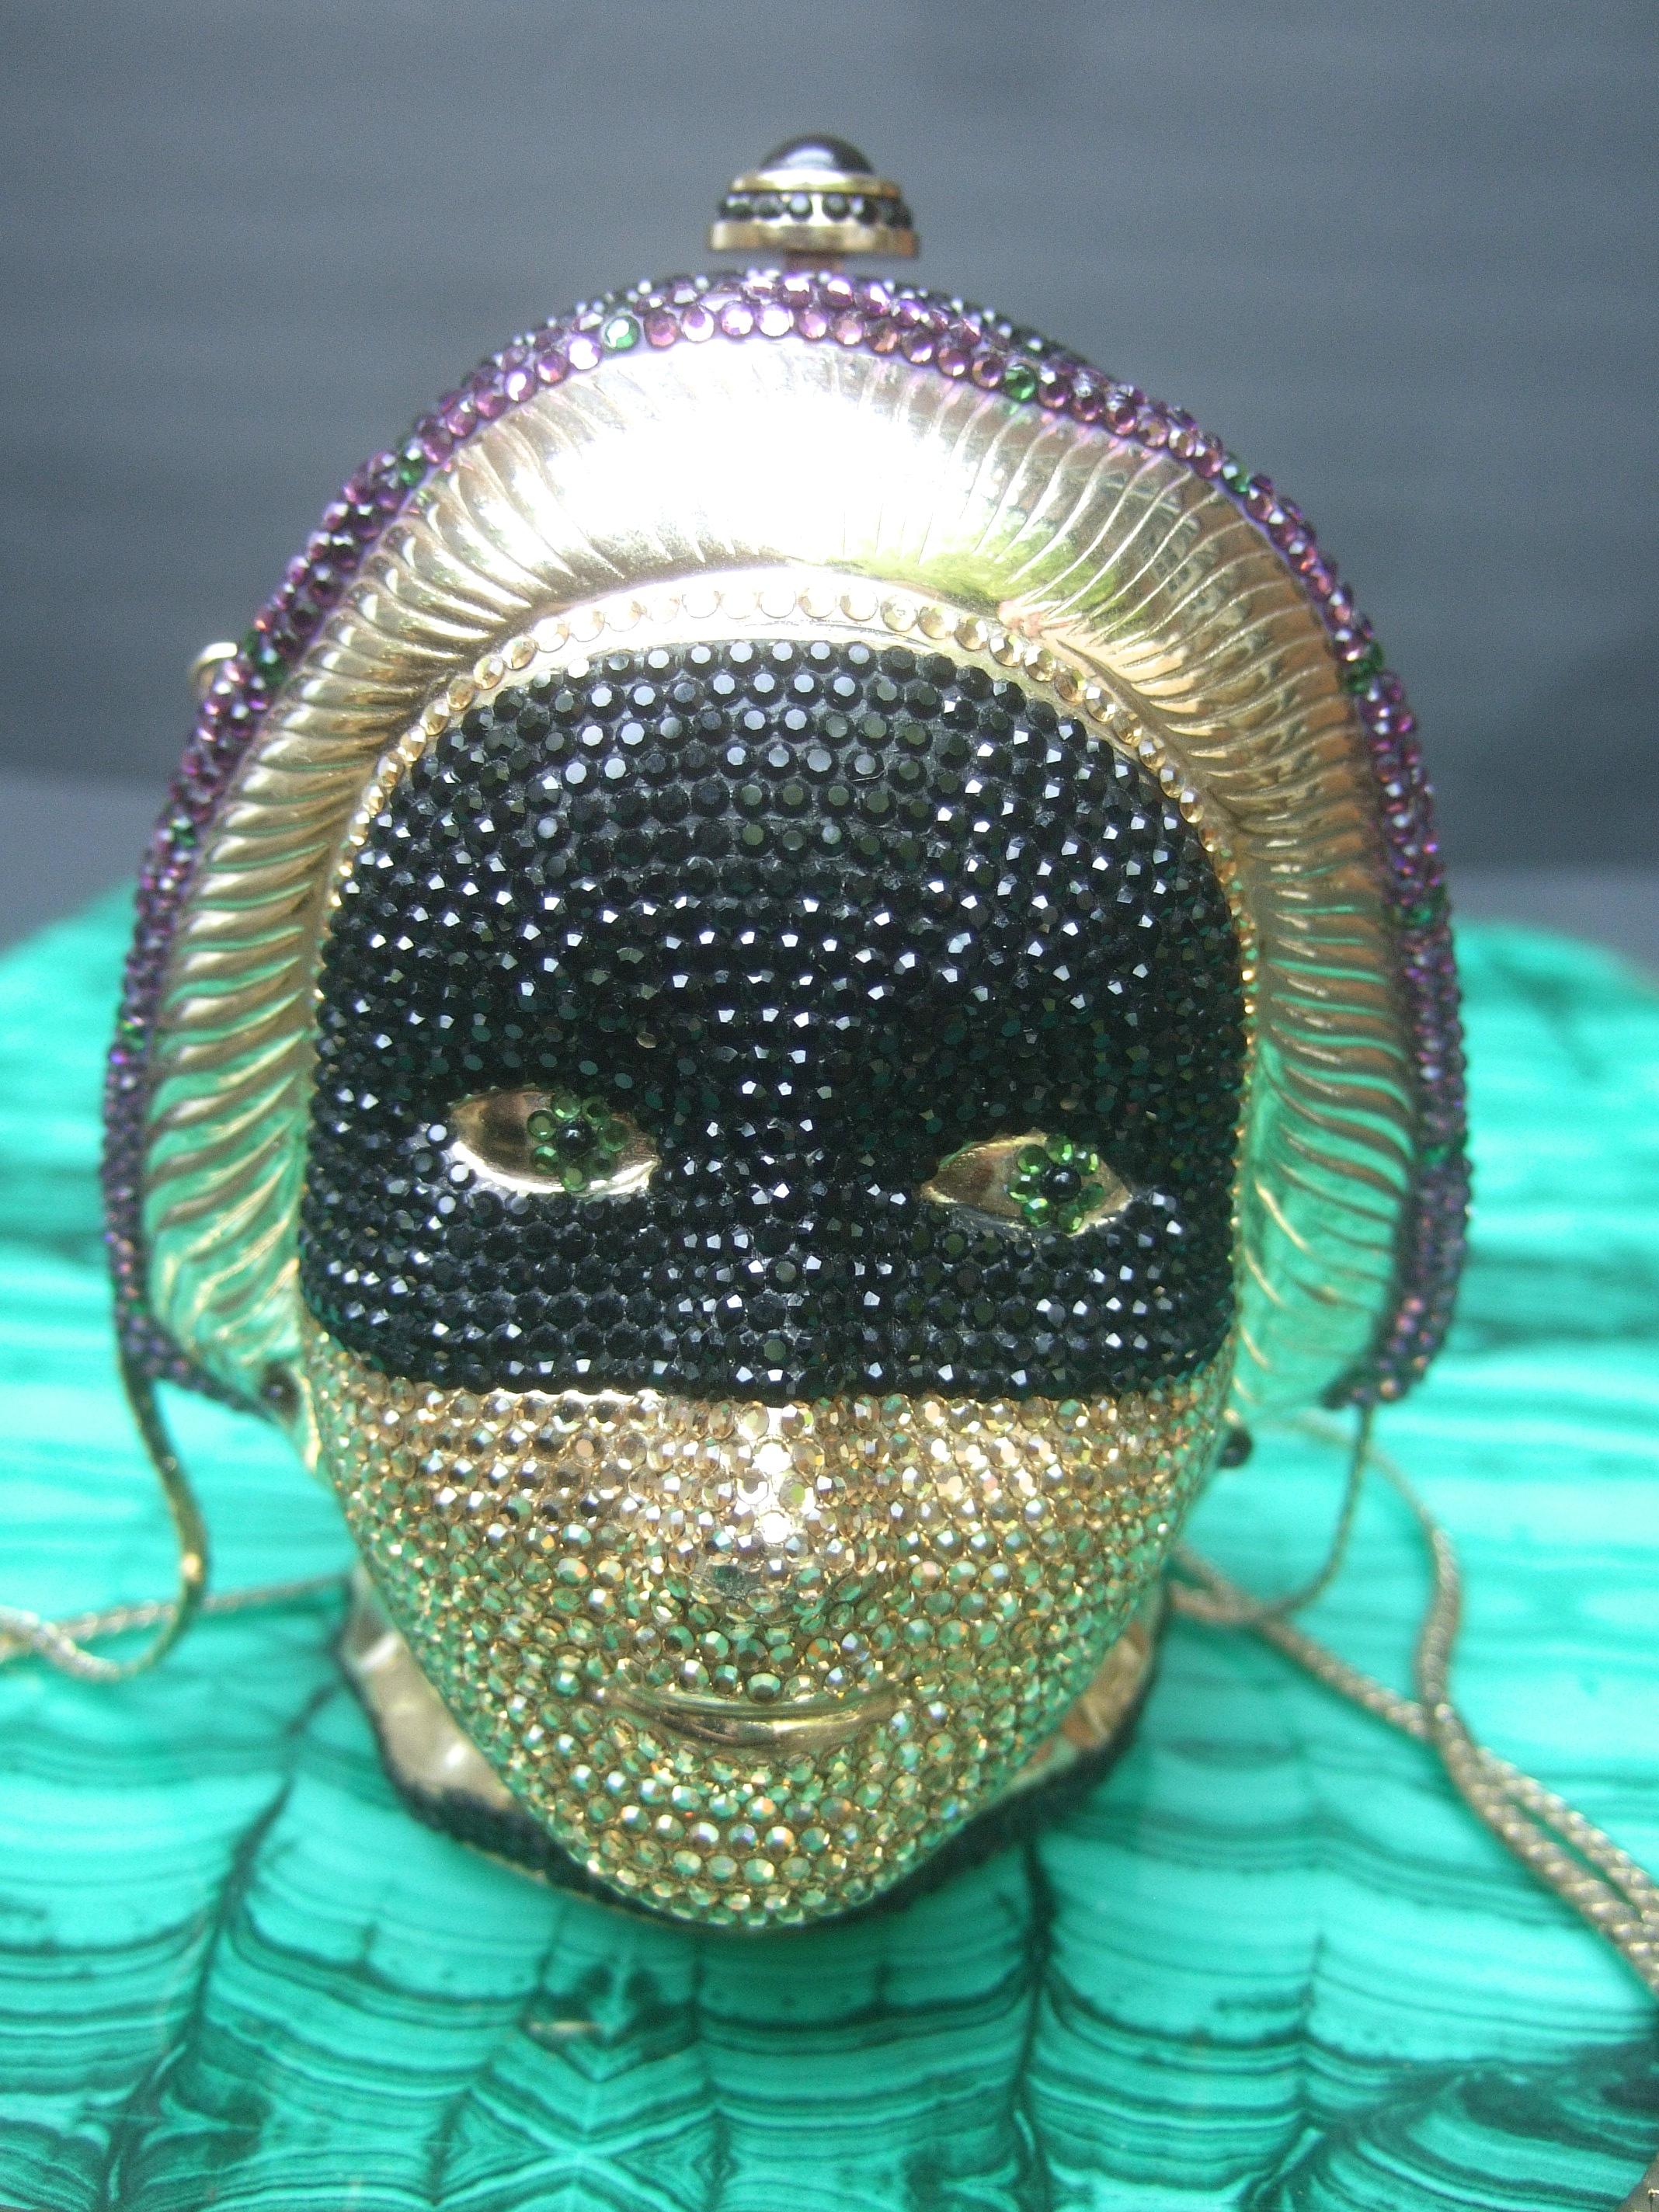 Judith Leiber Exquisite Crystal Encrusted Figural Woman Minaudière circa 1980s In Good Condition For Sale In University City, MO